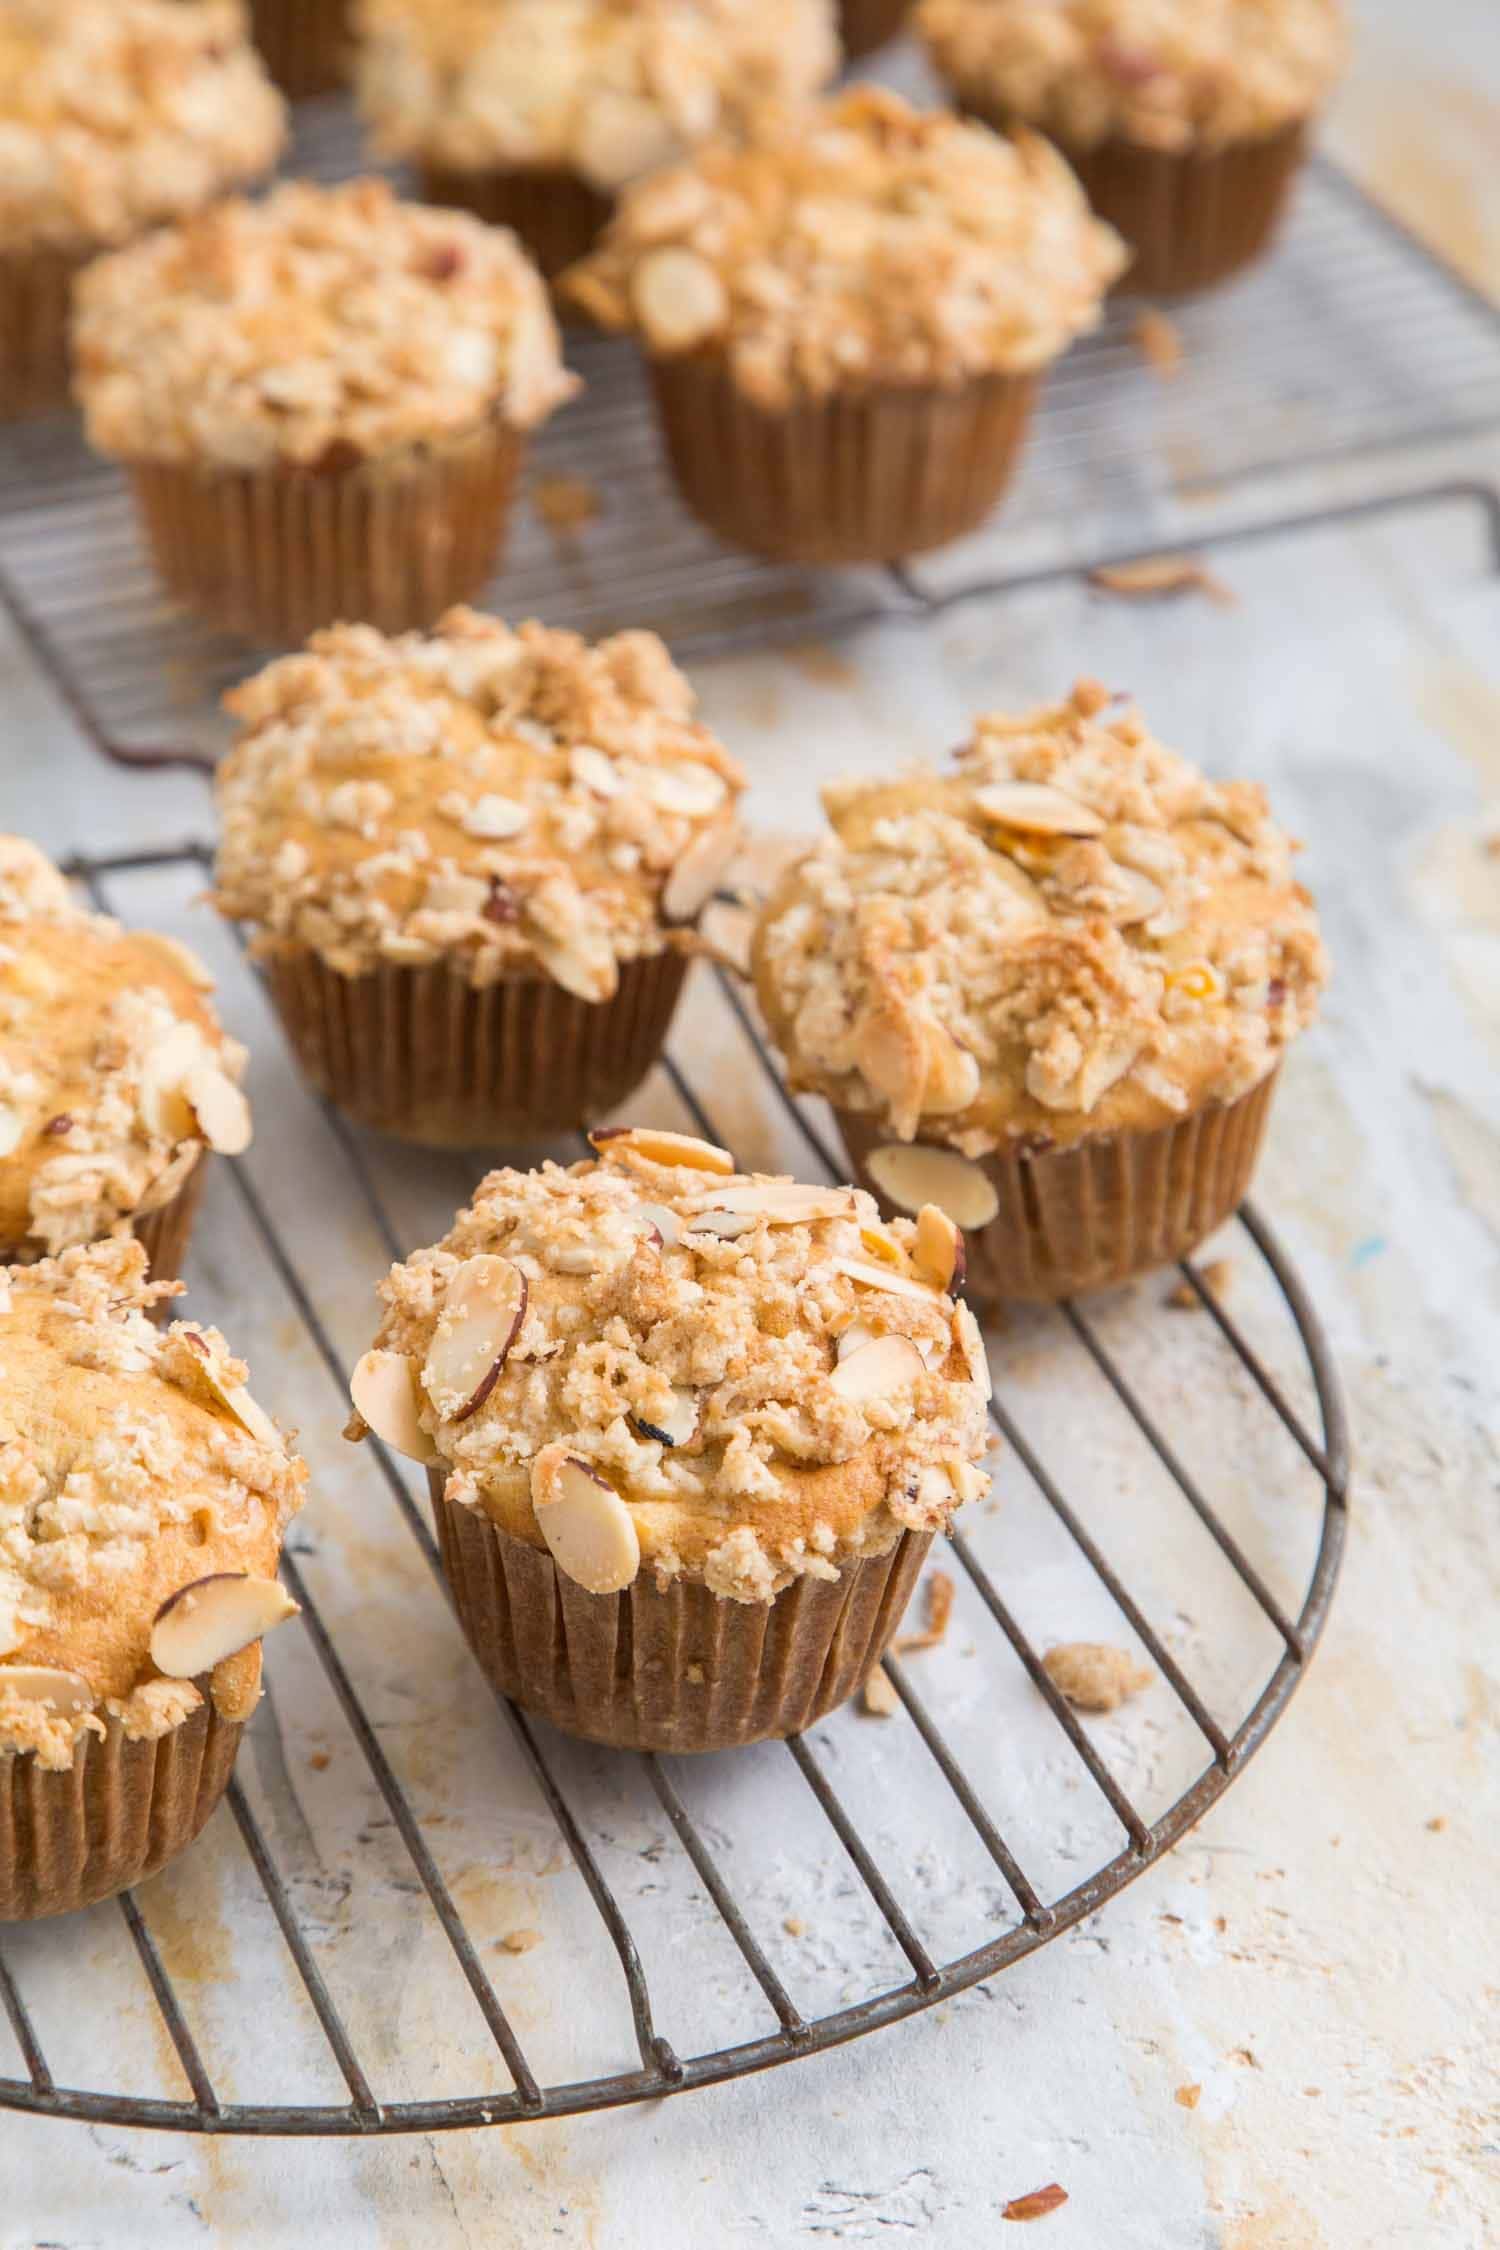 Banana jackfruit muffins with almond coconut crumble on a cooling rack.